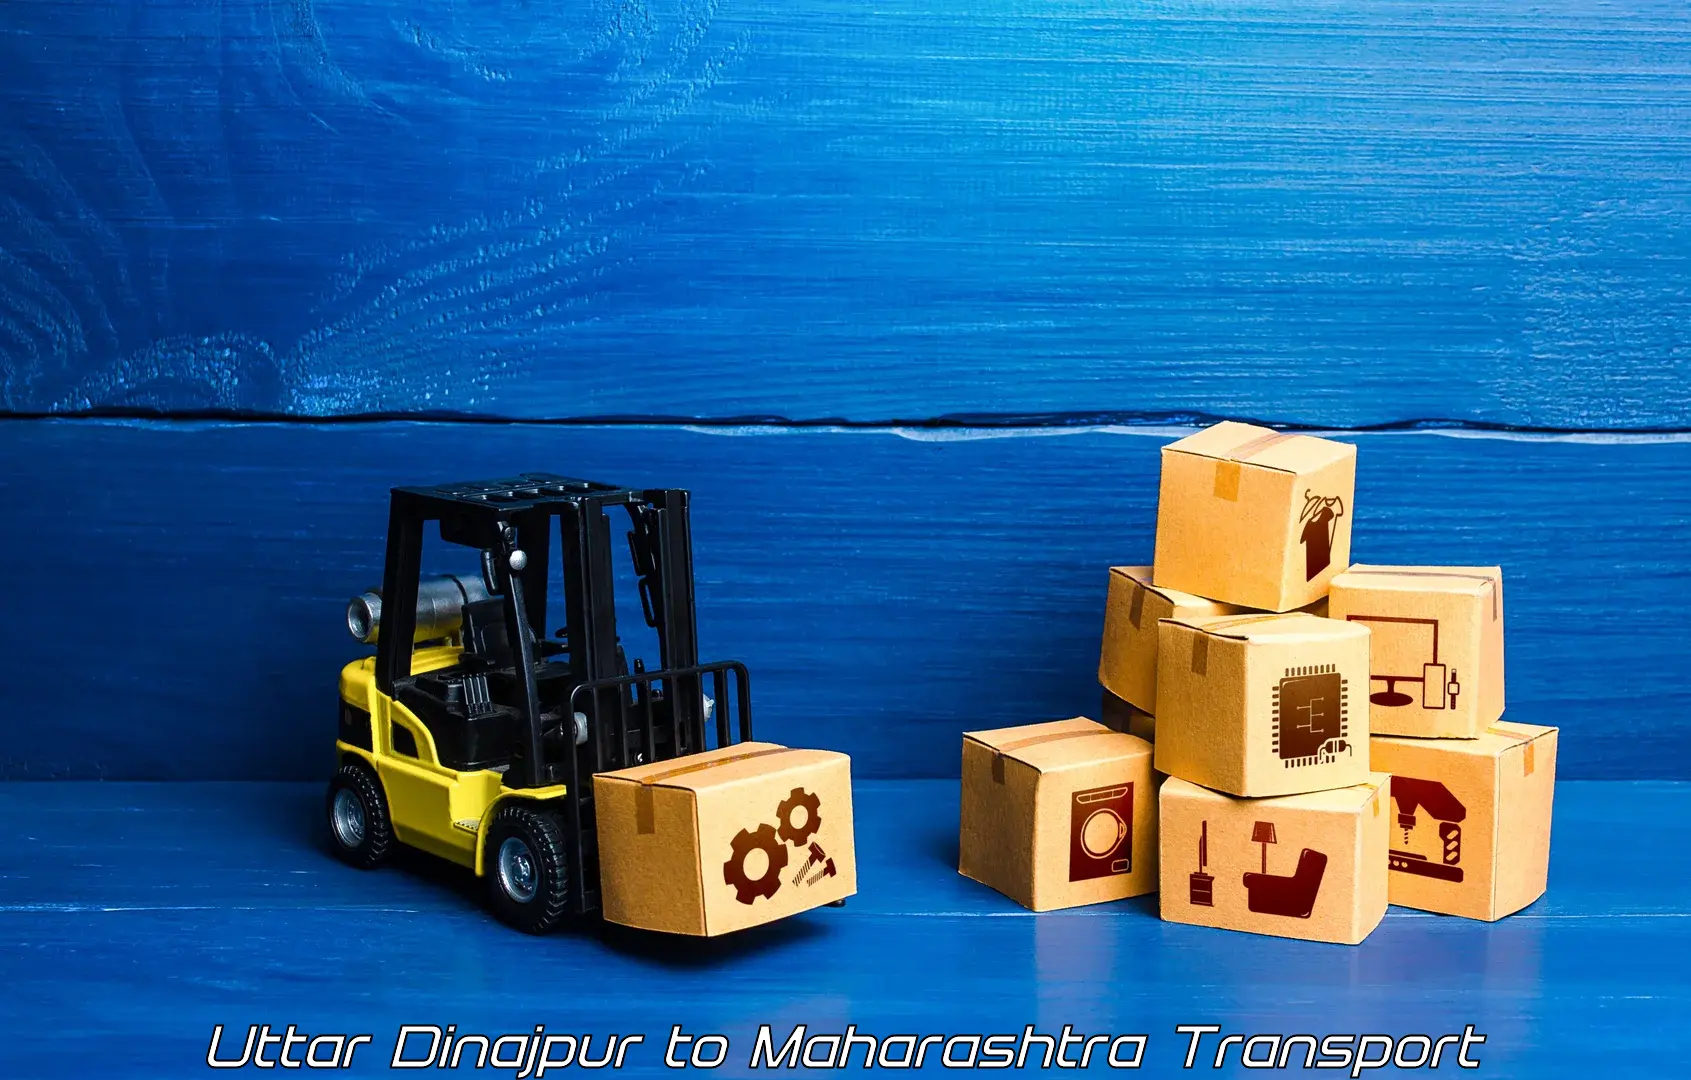 Lorry transport service Uttar Dinajpur to Greater Thane